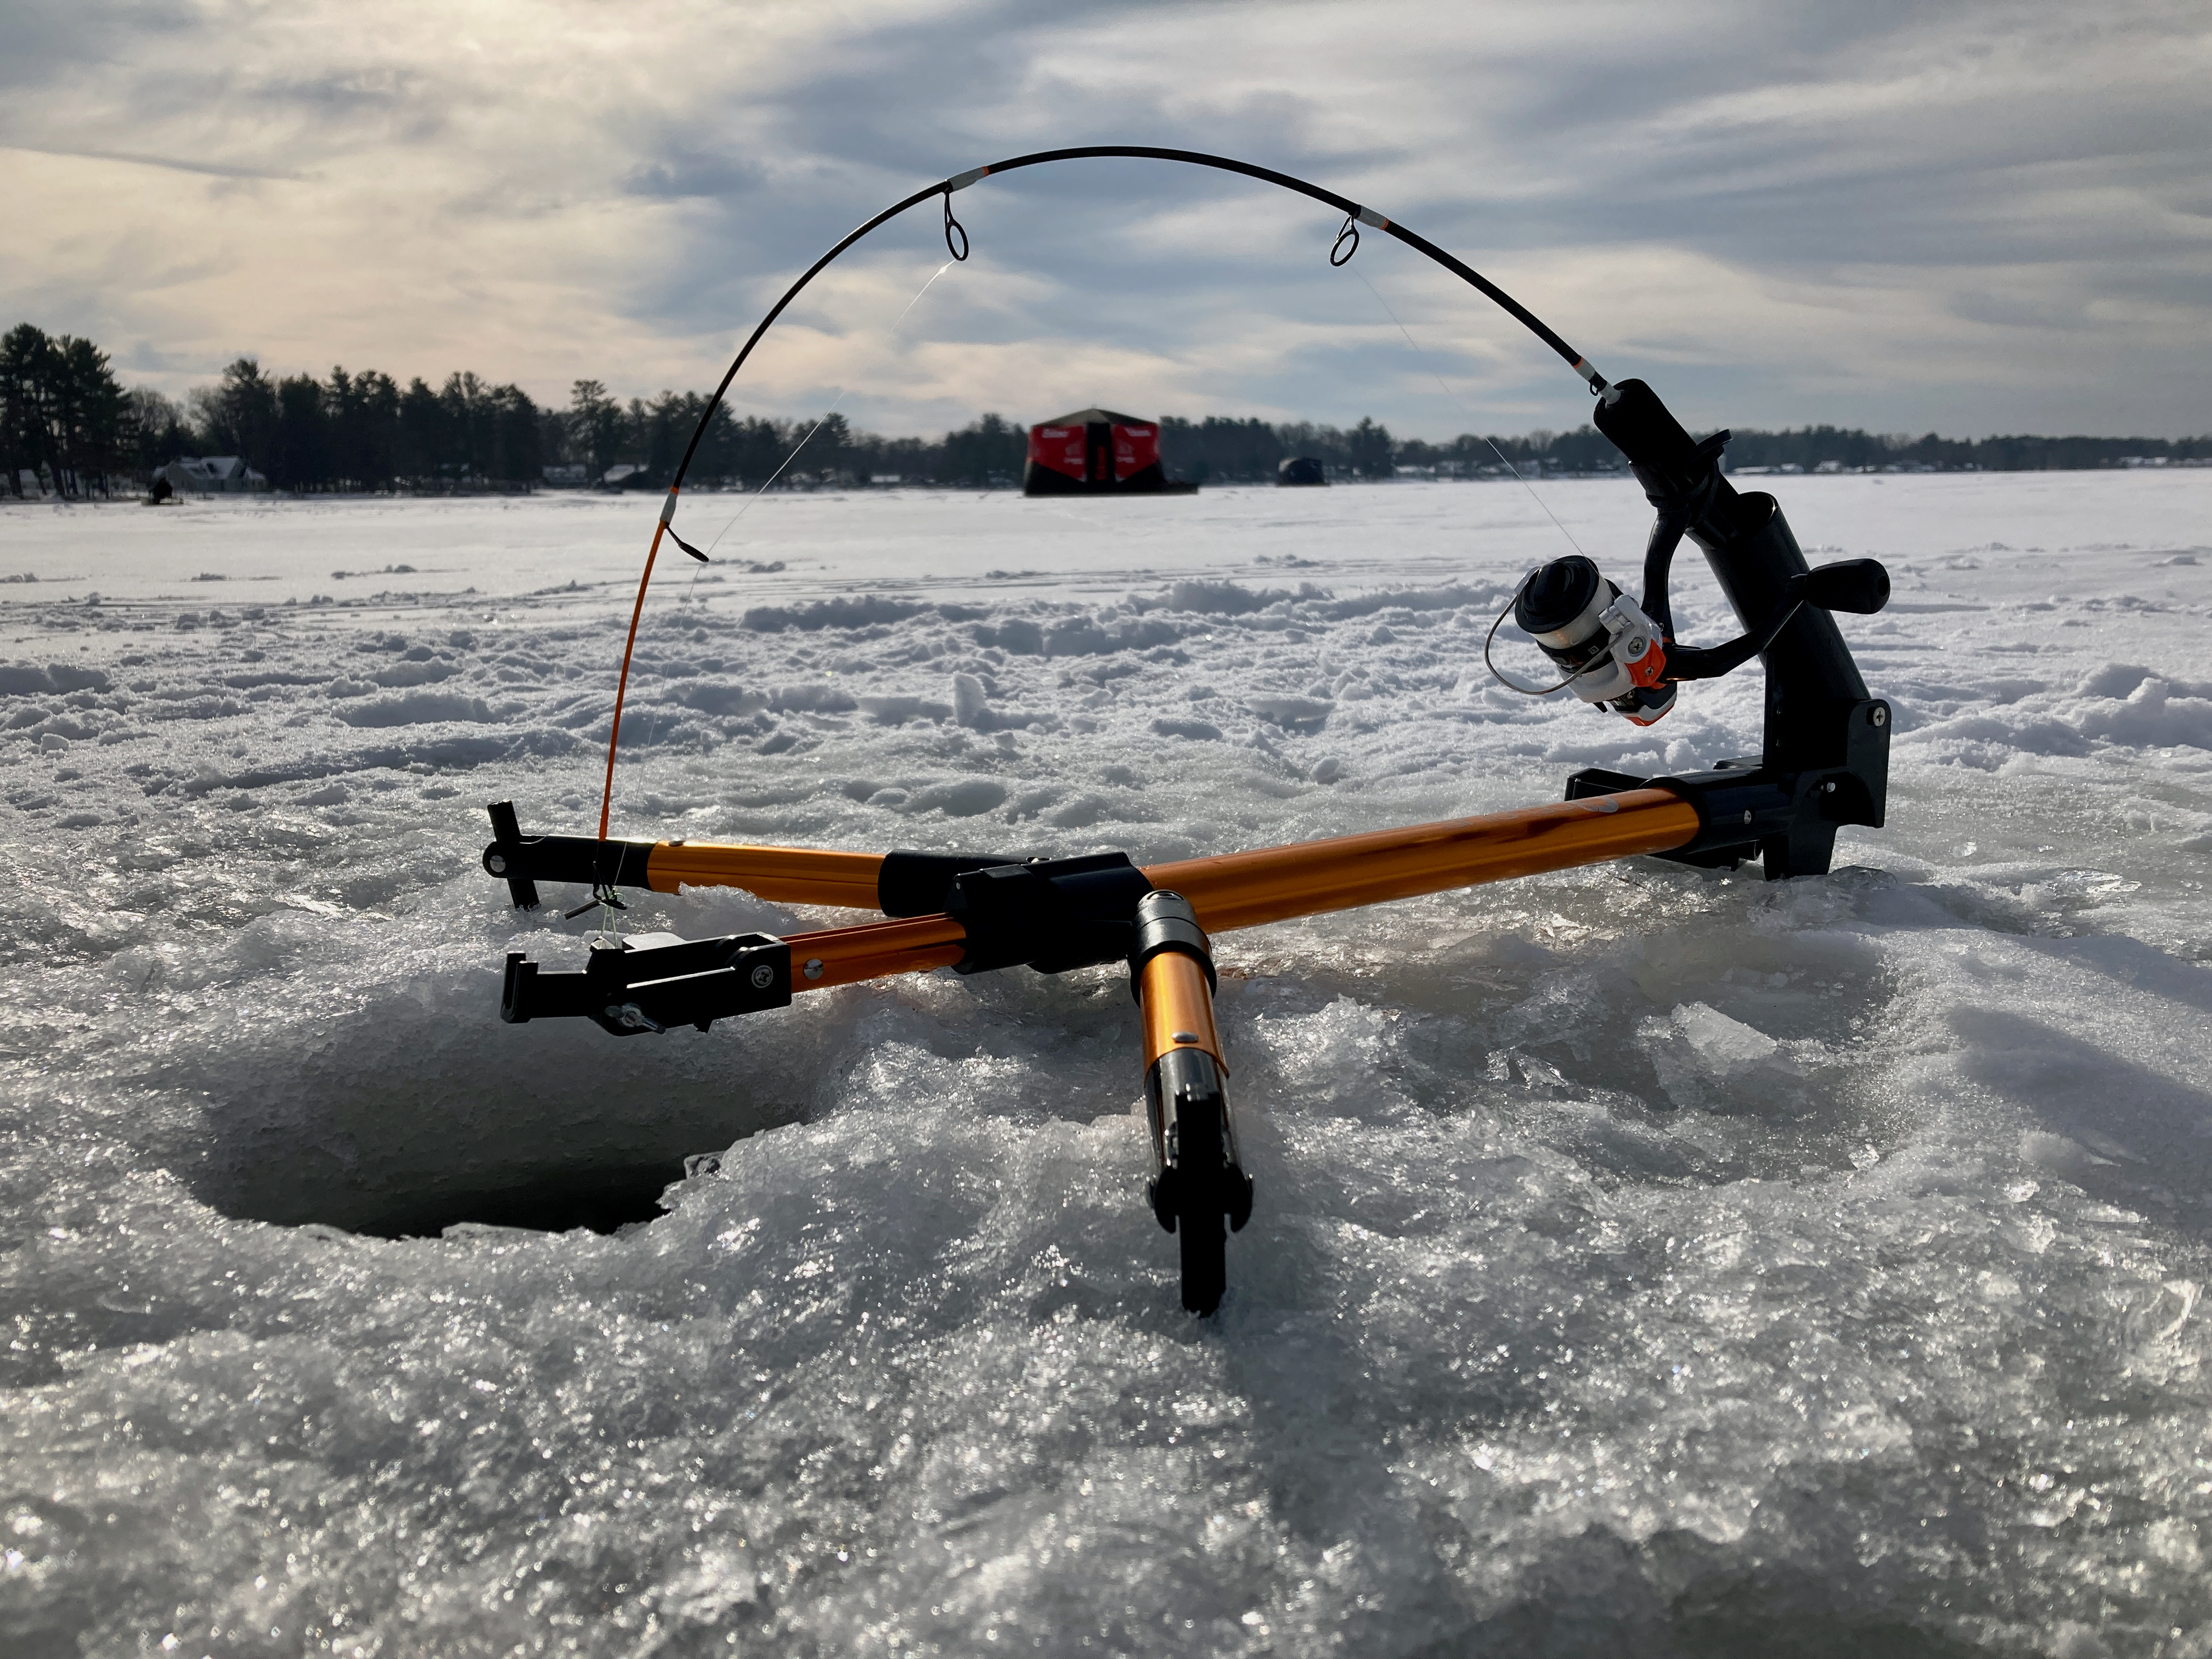 New 2023 Ice Fishing Products from Clam Outdoors - Virtual Angling